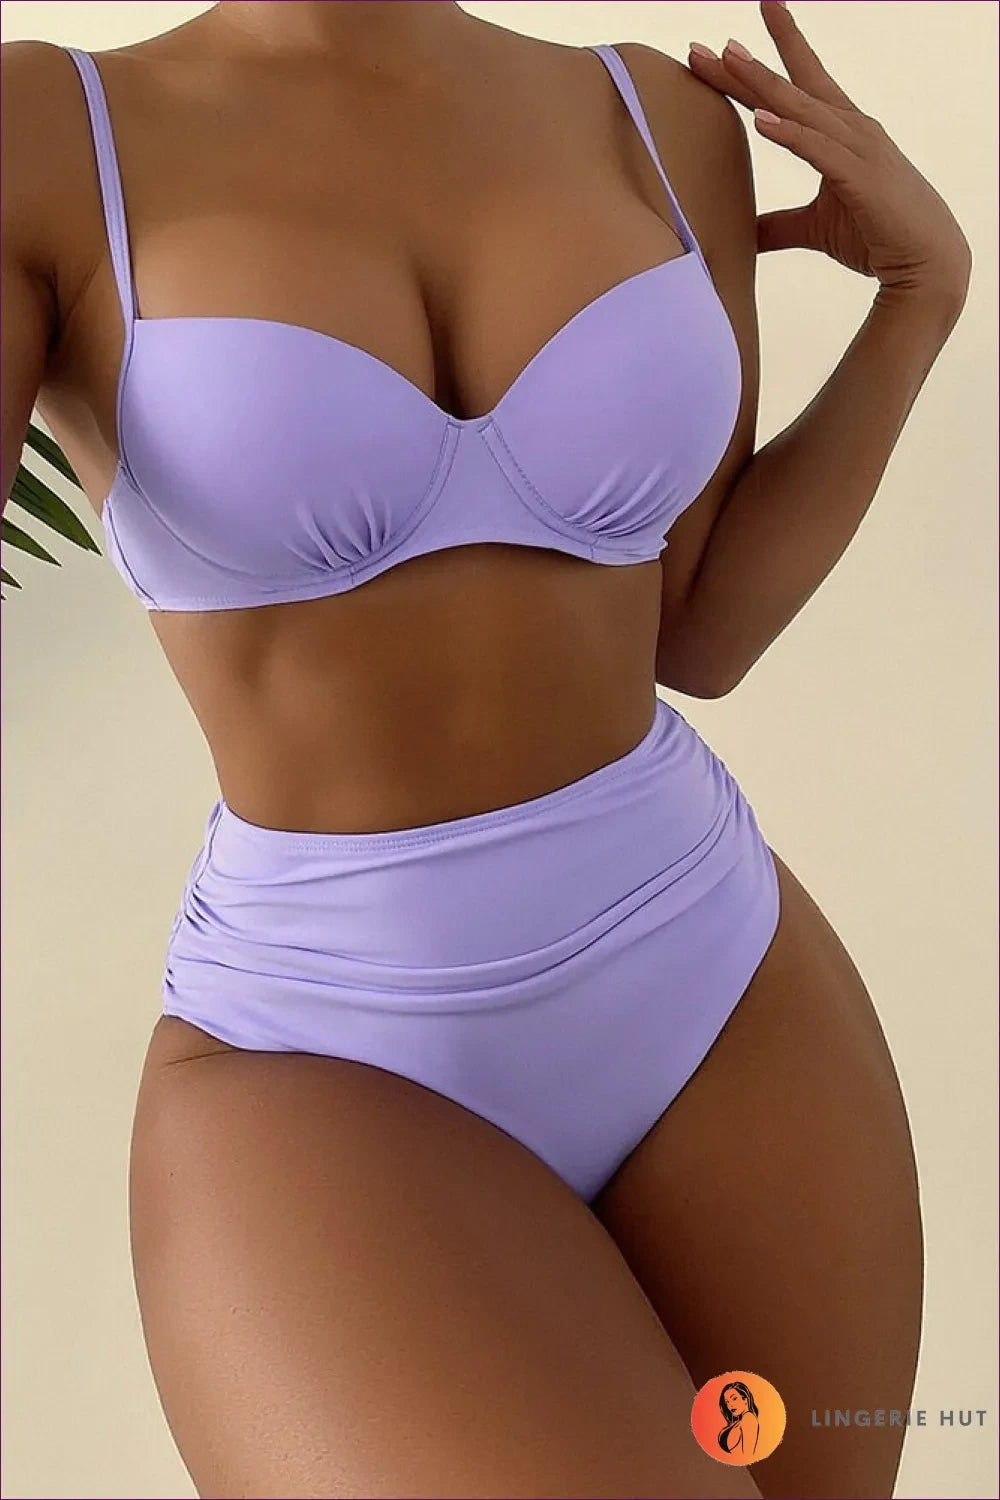 Flaunt Your Curves With Our Push Up High Waist Bikini Set. Padded Cups, Underwire Support, And Confidence In